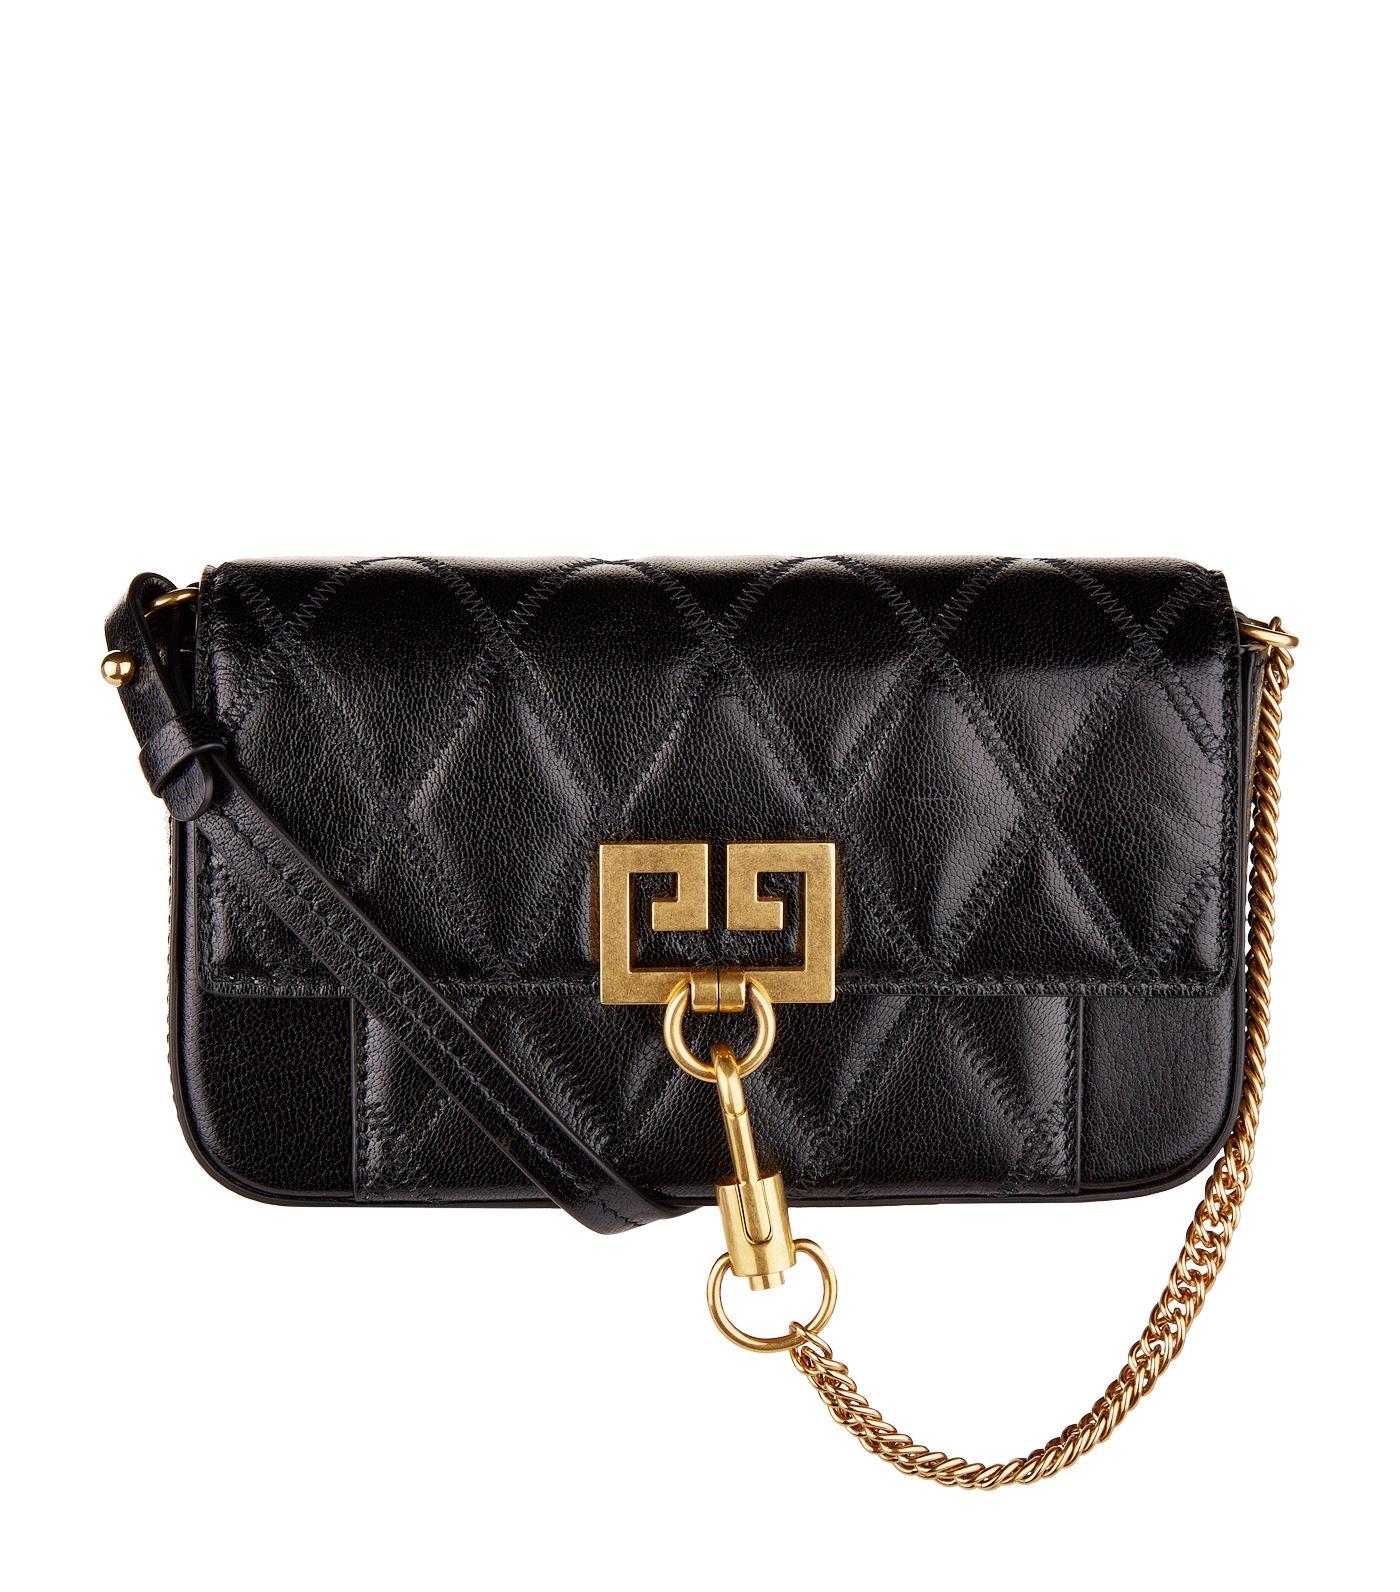 Givenchy Leather Mini Quilted Pocket Bag in Black - Lyst